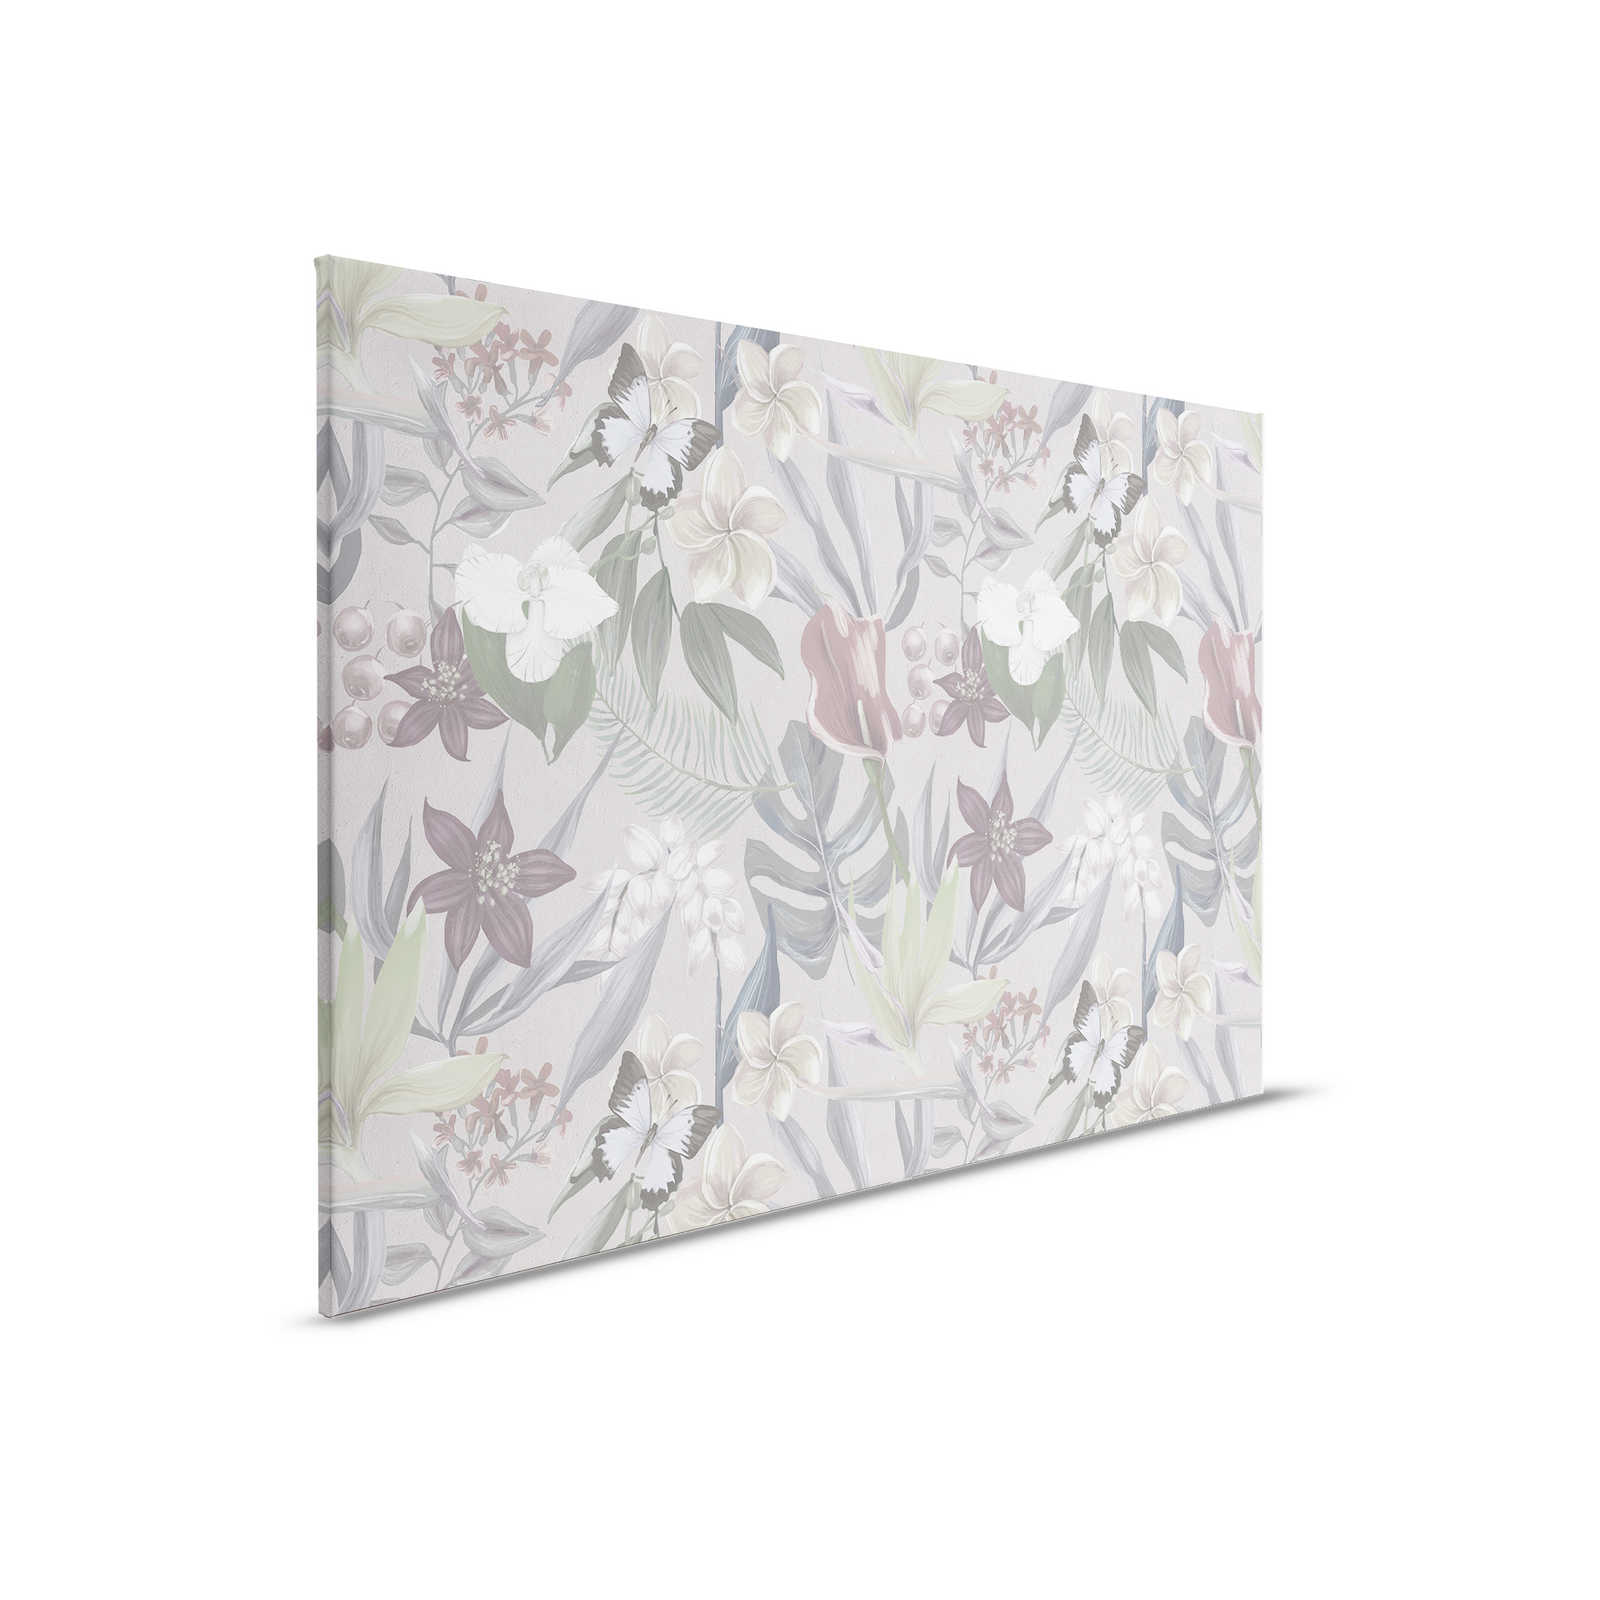 Floral Jungle Canvas Painting drawn | grey, white - 0.90 m x 0.60 m
